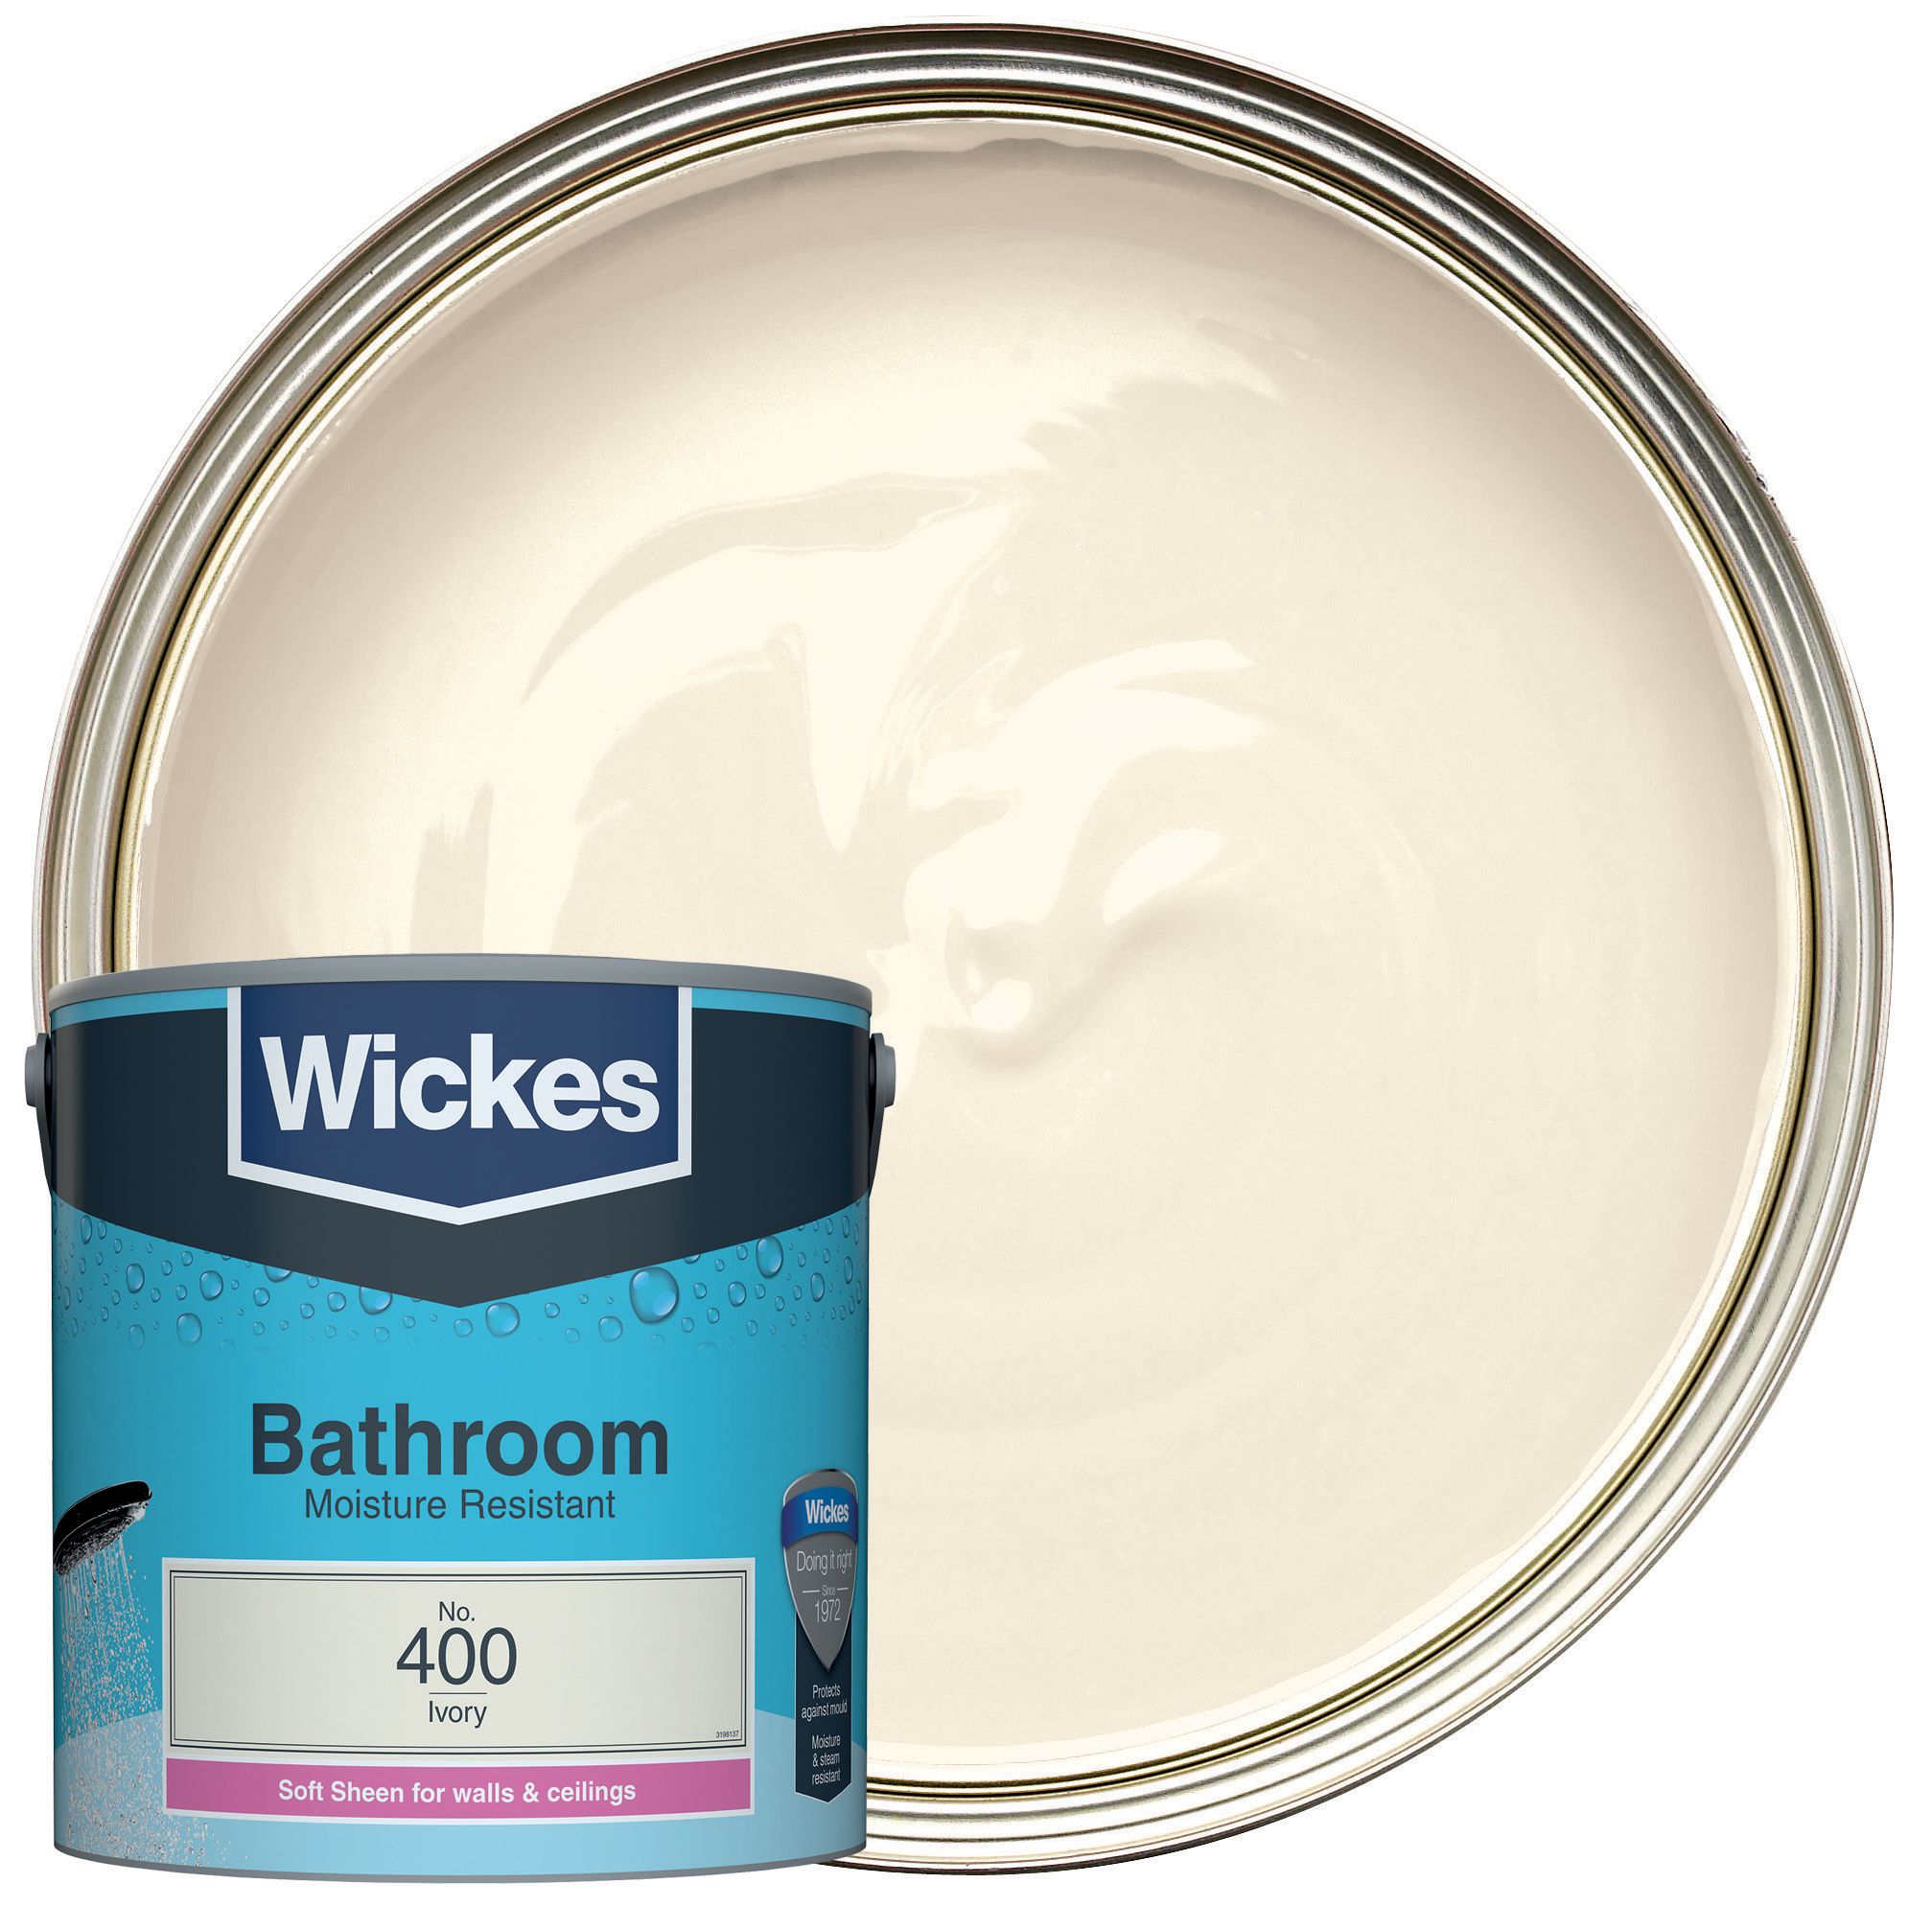 Wickes Bathroom Soft Sheen Emulsion Paint - Ivory No.400 - 2.5L